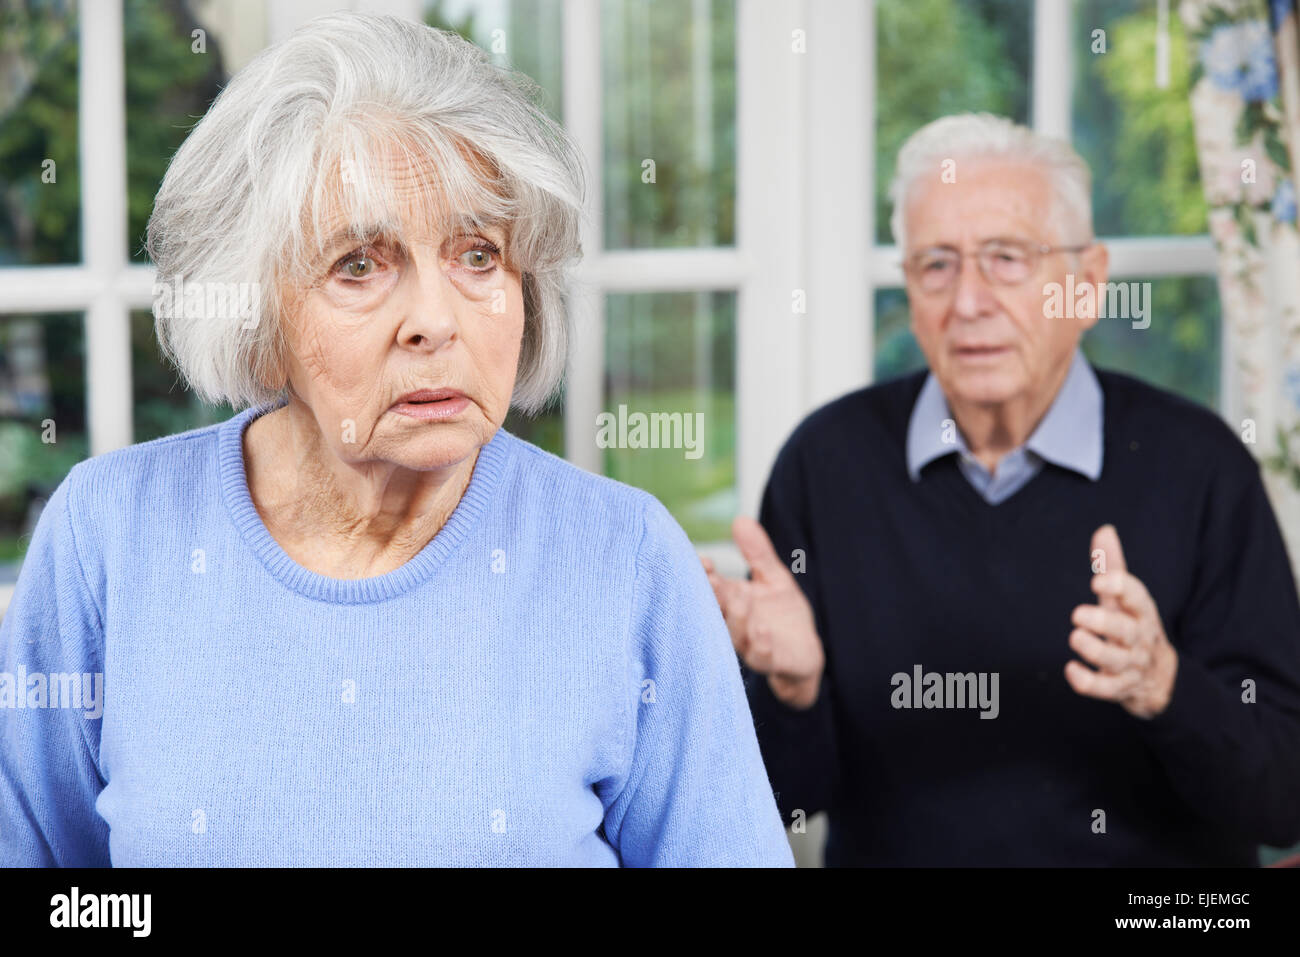 Unhappy Senior Couple At Home Together Stock Photo